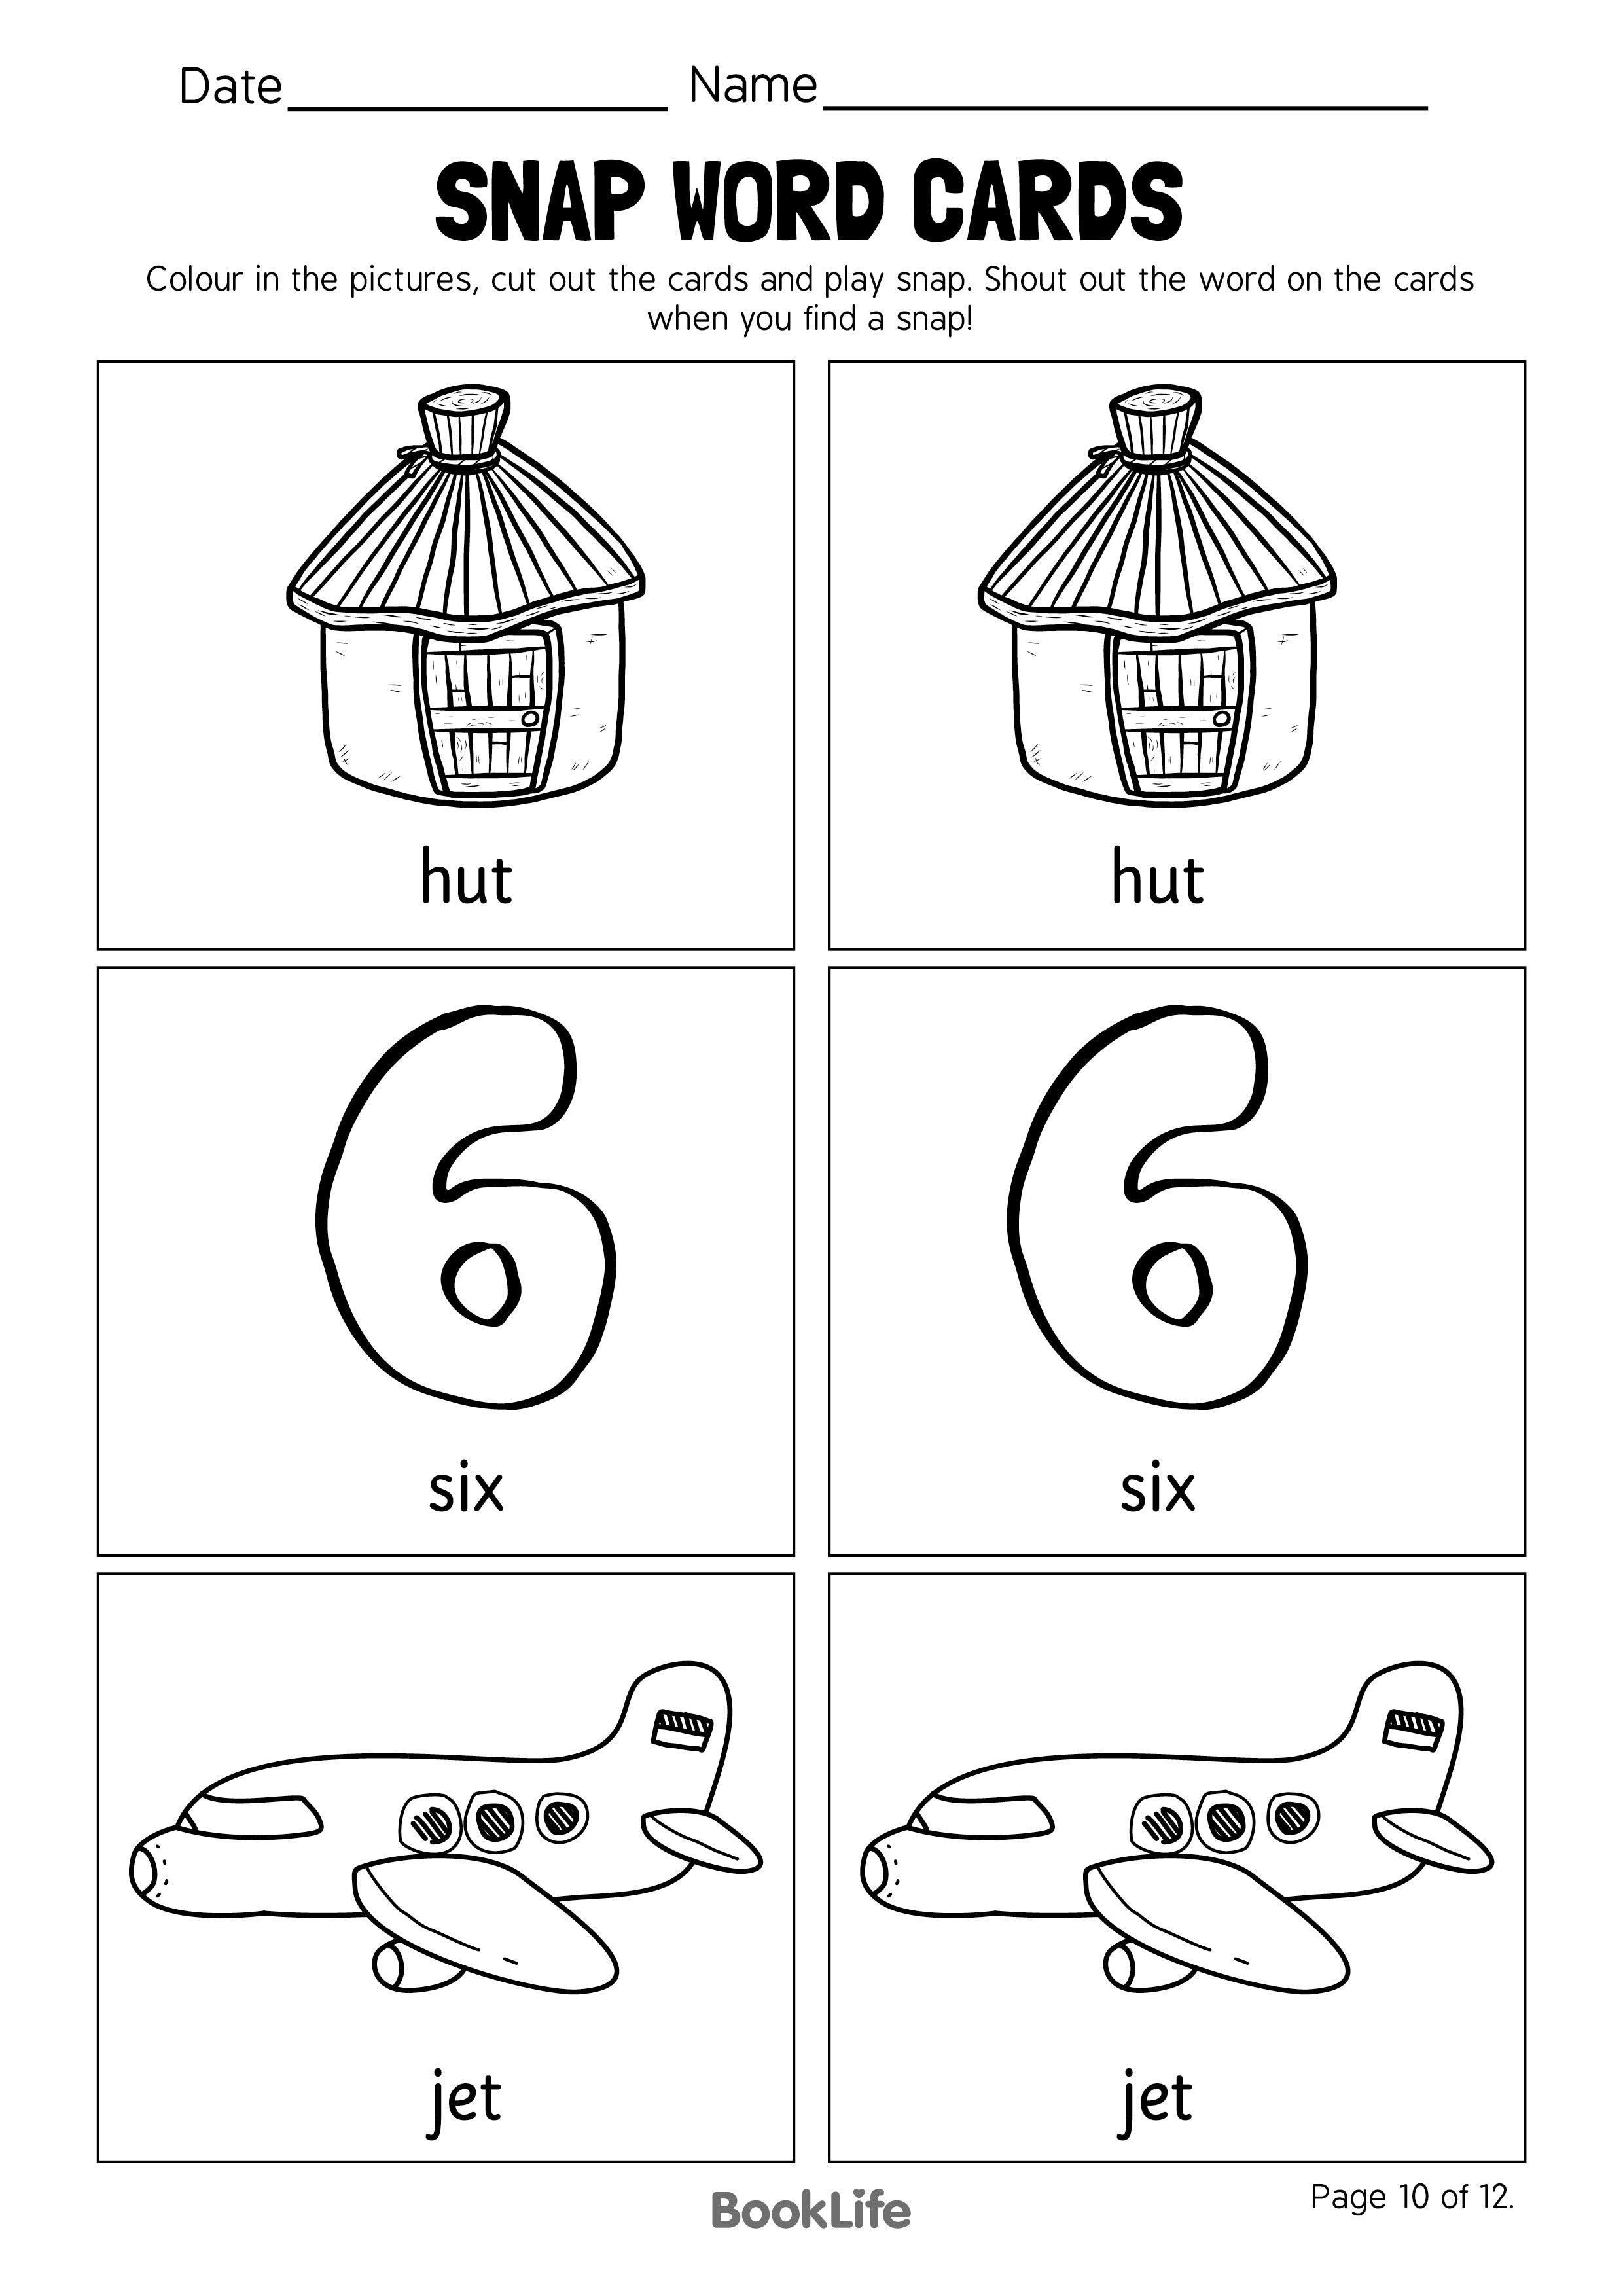 Snap Word Cards - Option 10